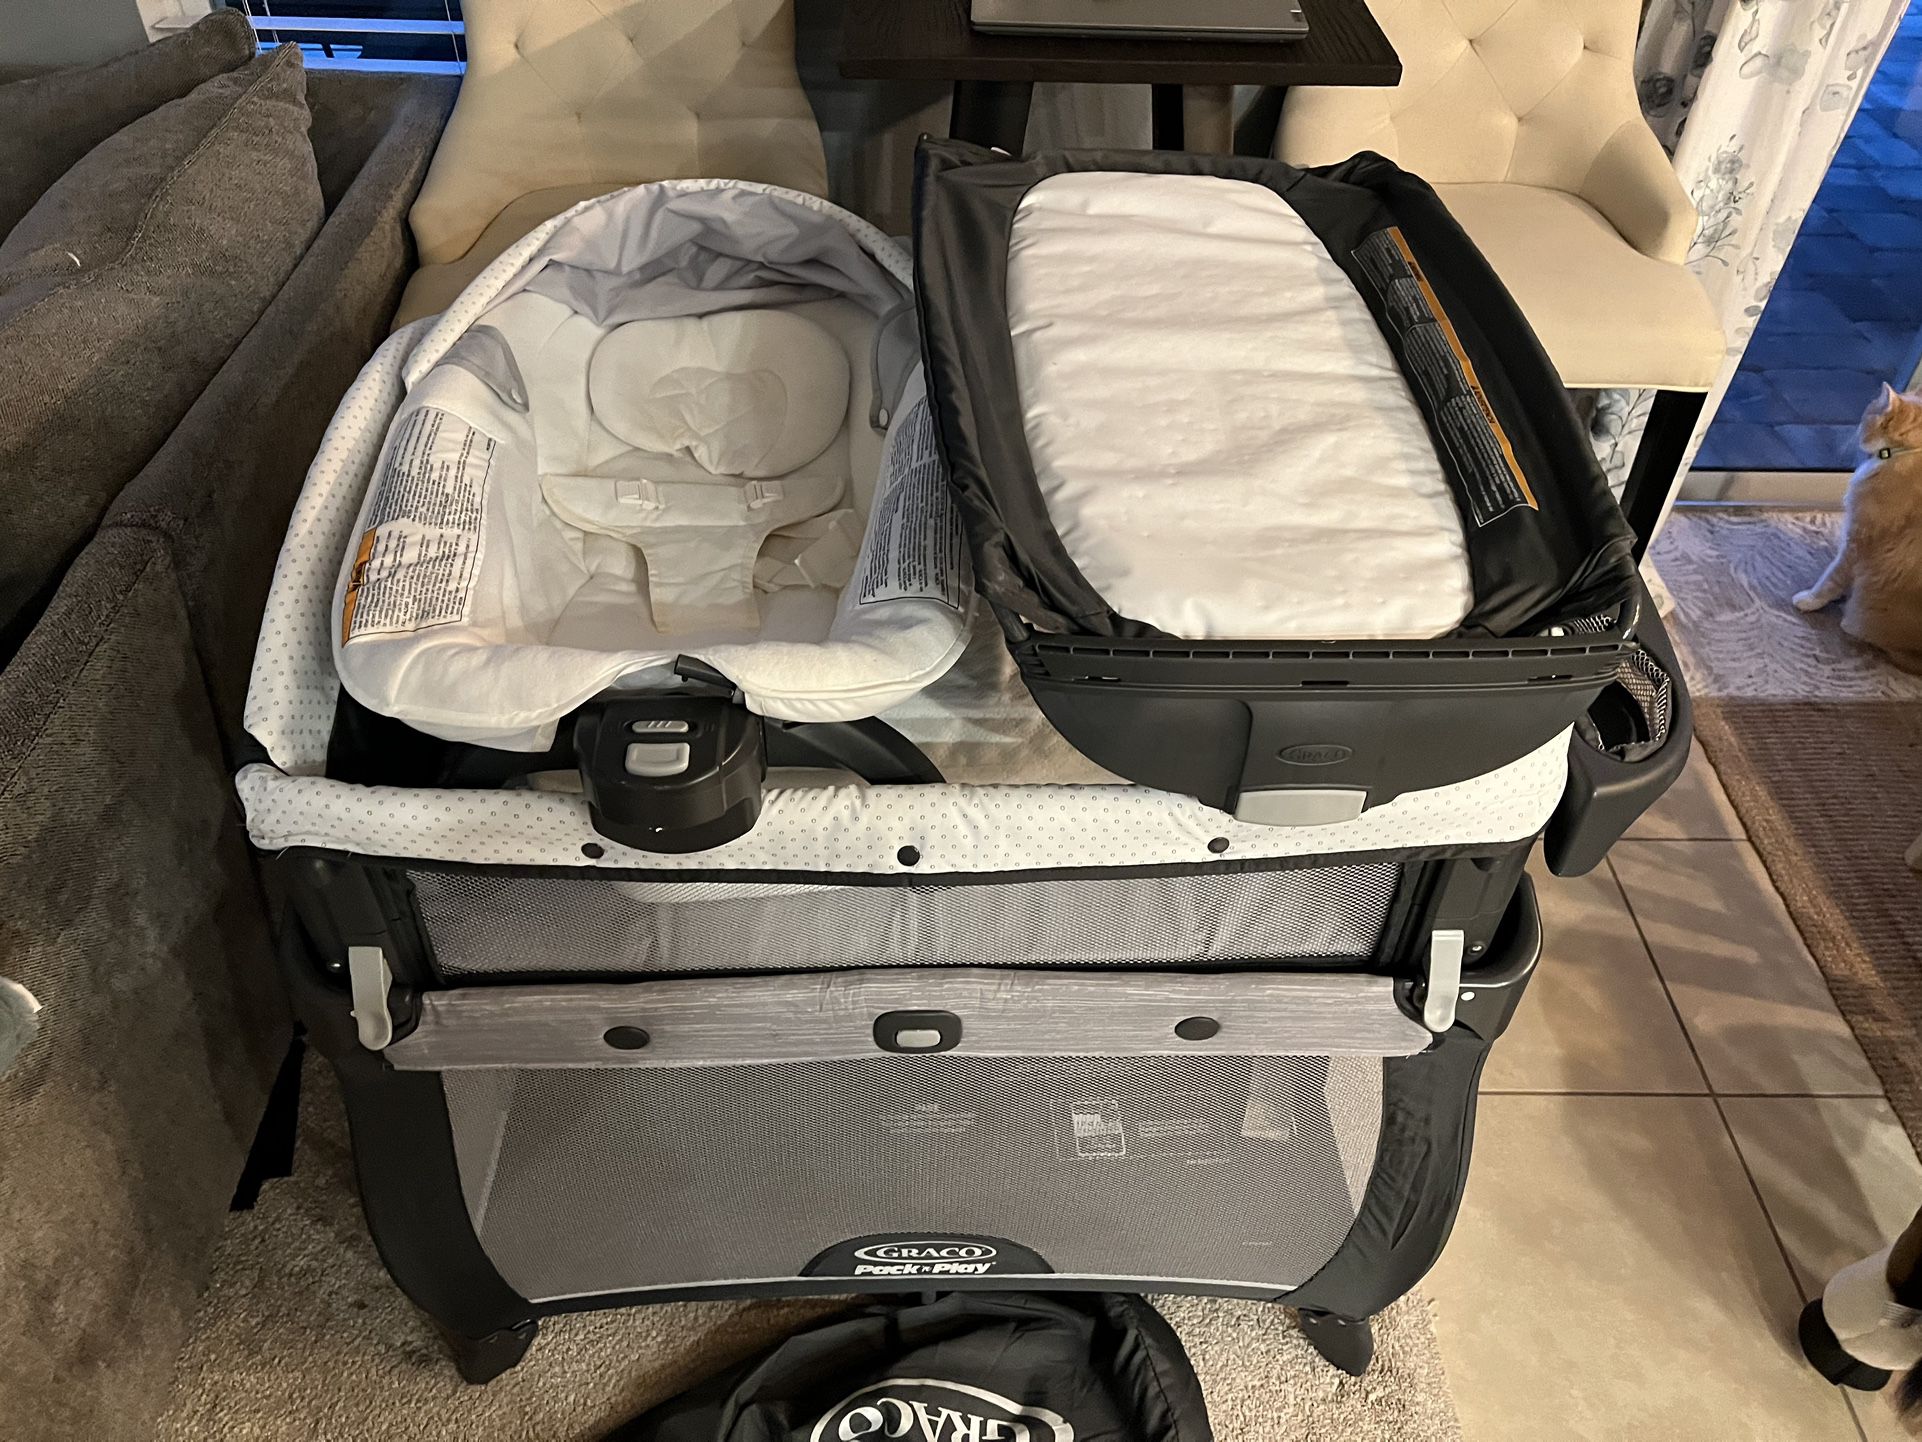 Greco Pack N Play Newborn To Toddler With Extras